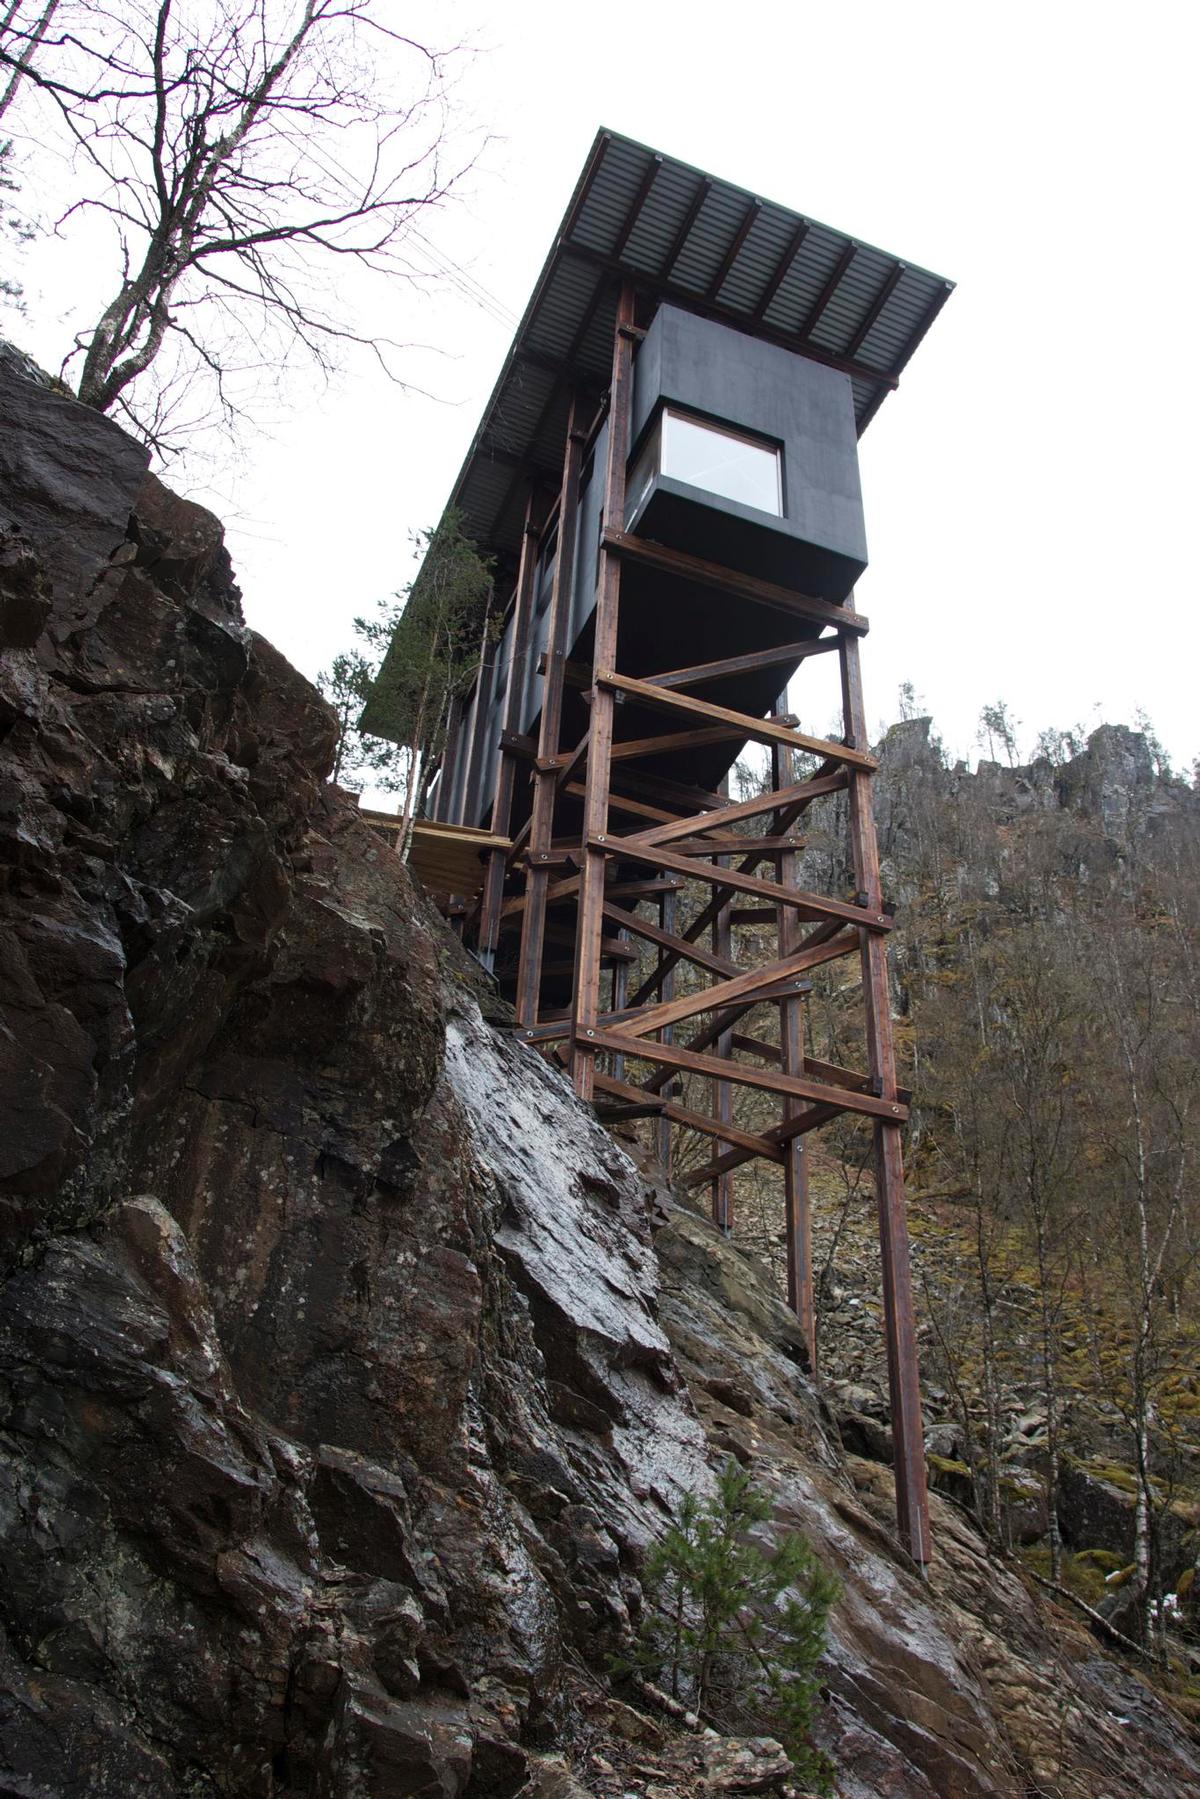 The new installation at the old zinc mines in Sauda has been designed by architect Peter Zumthor / Per Ritzler